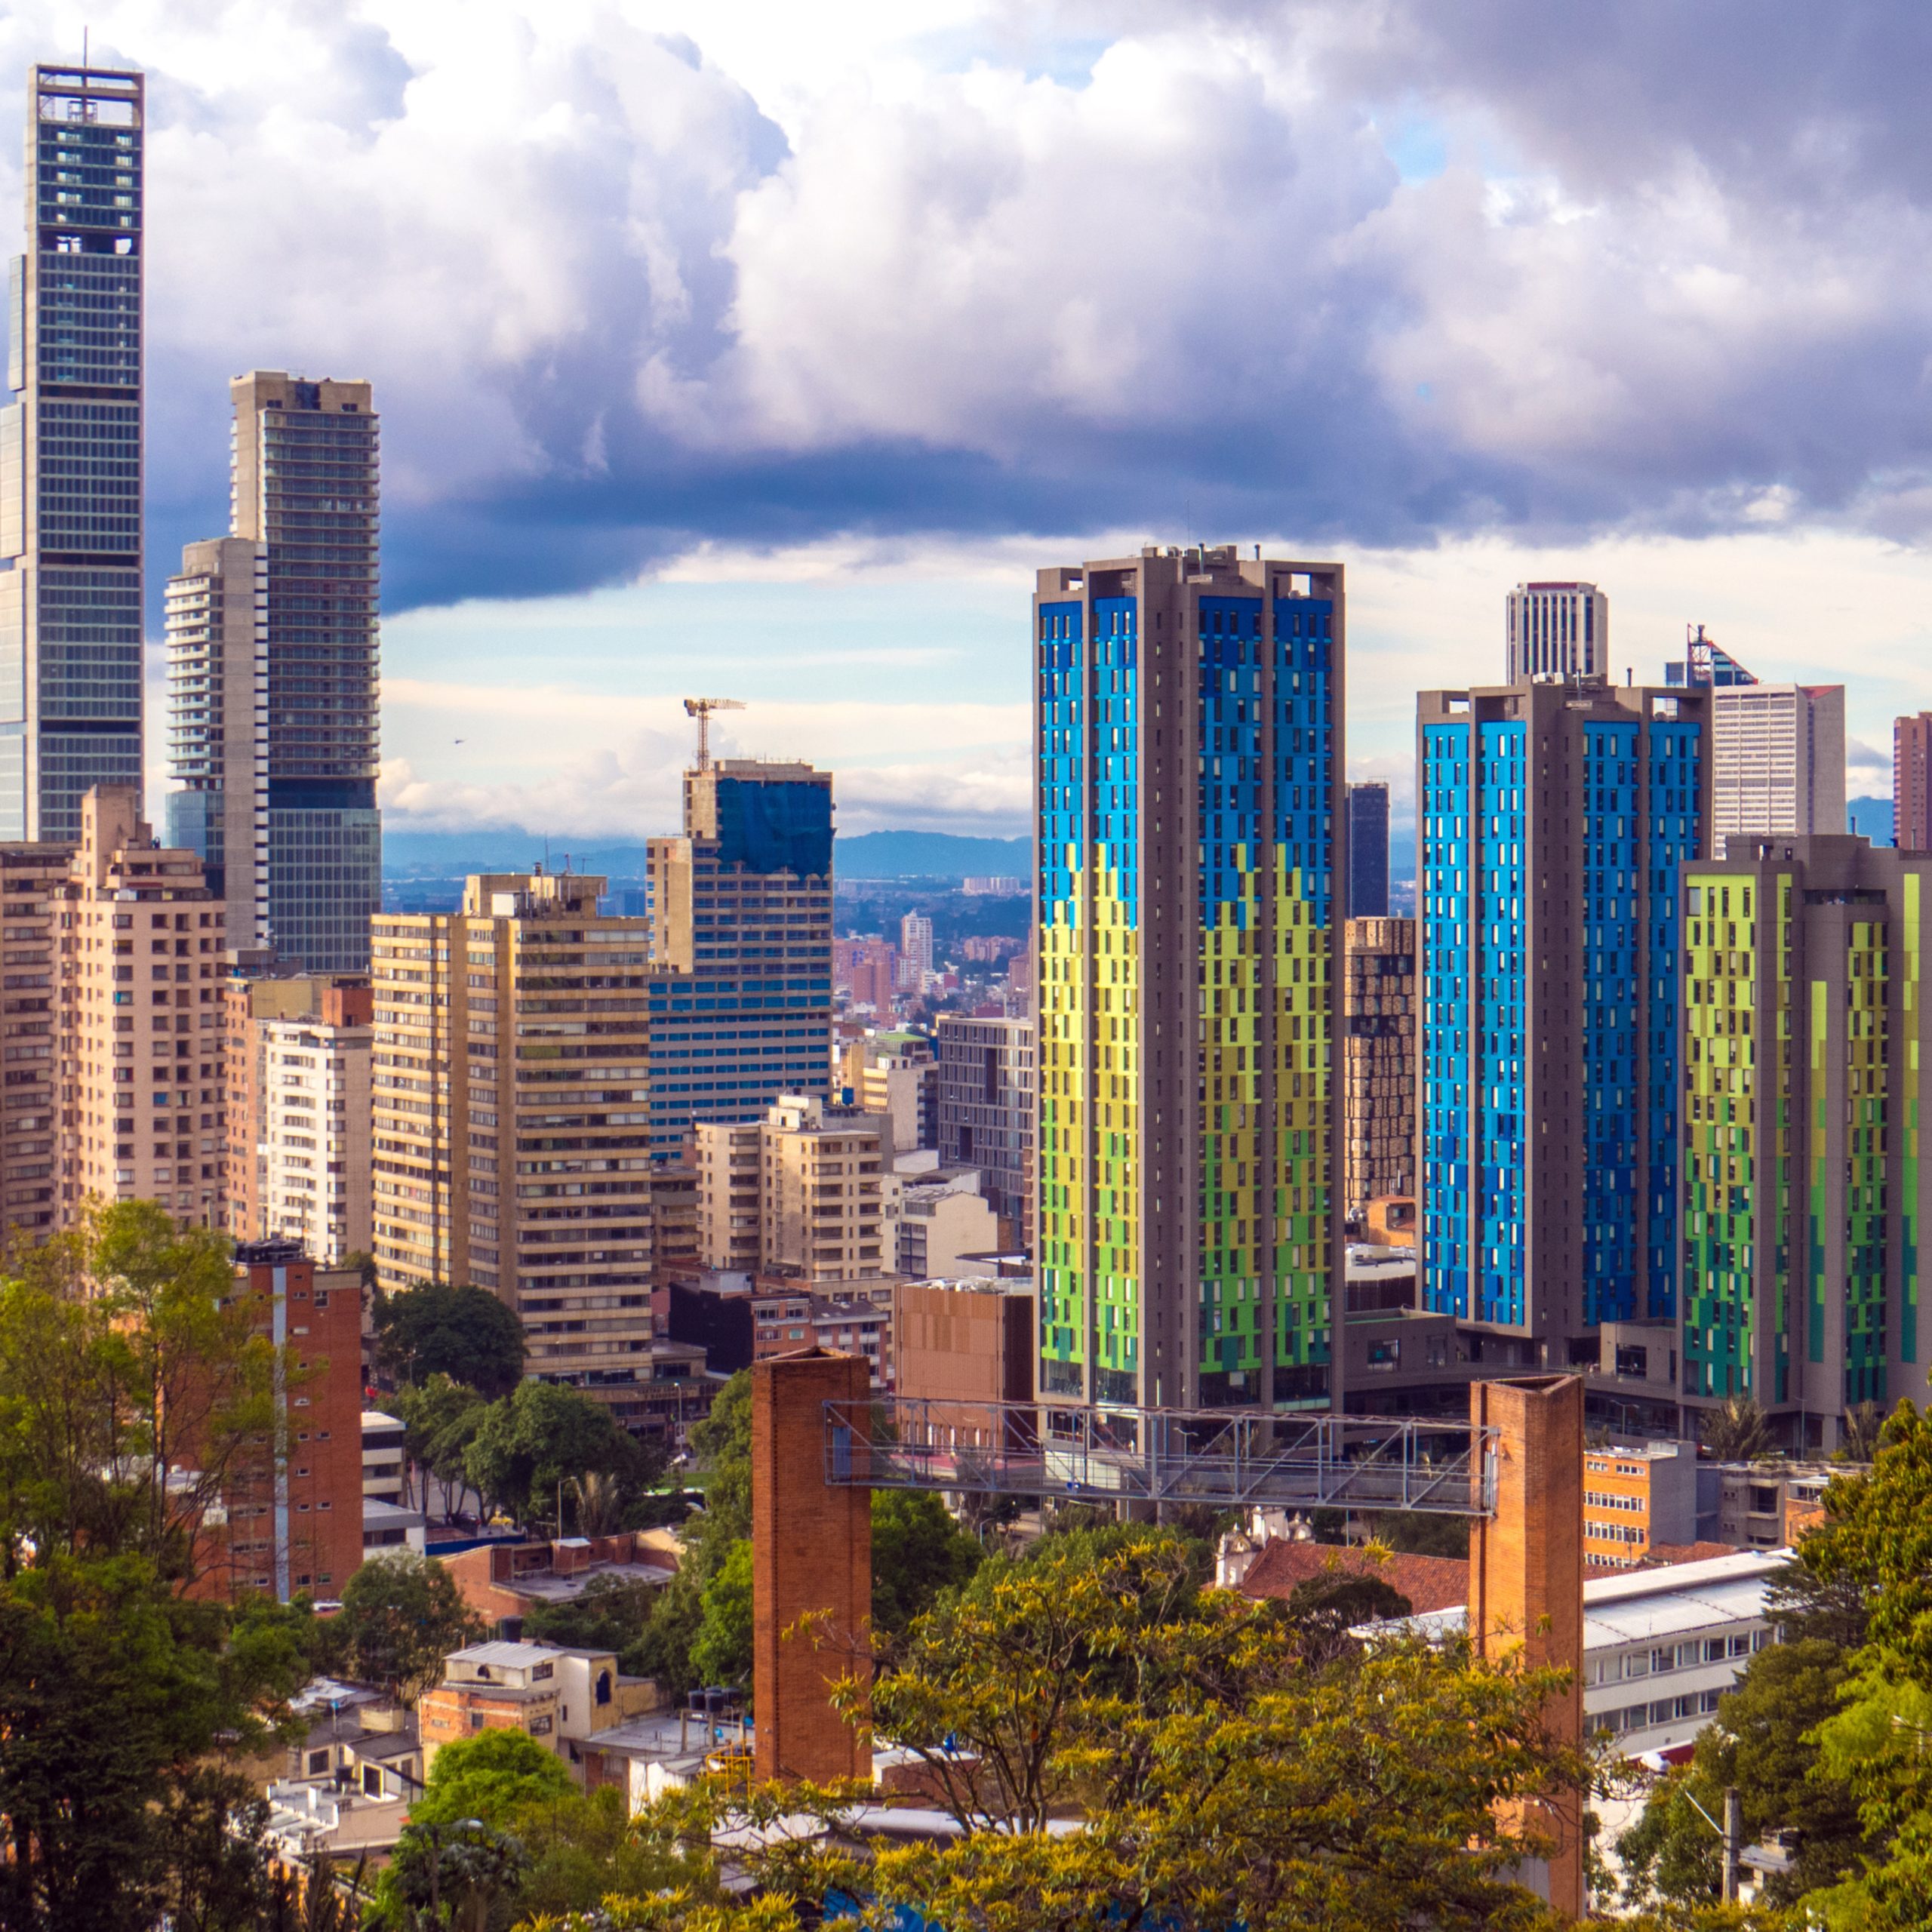 [Press Release] Building Markets Expands to Latin America